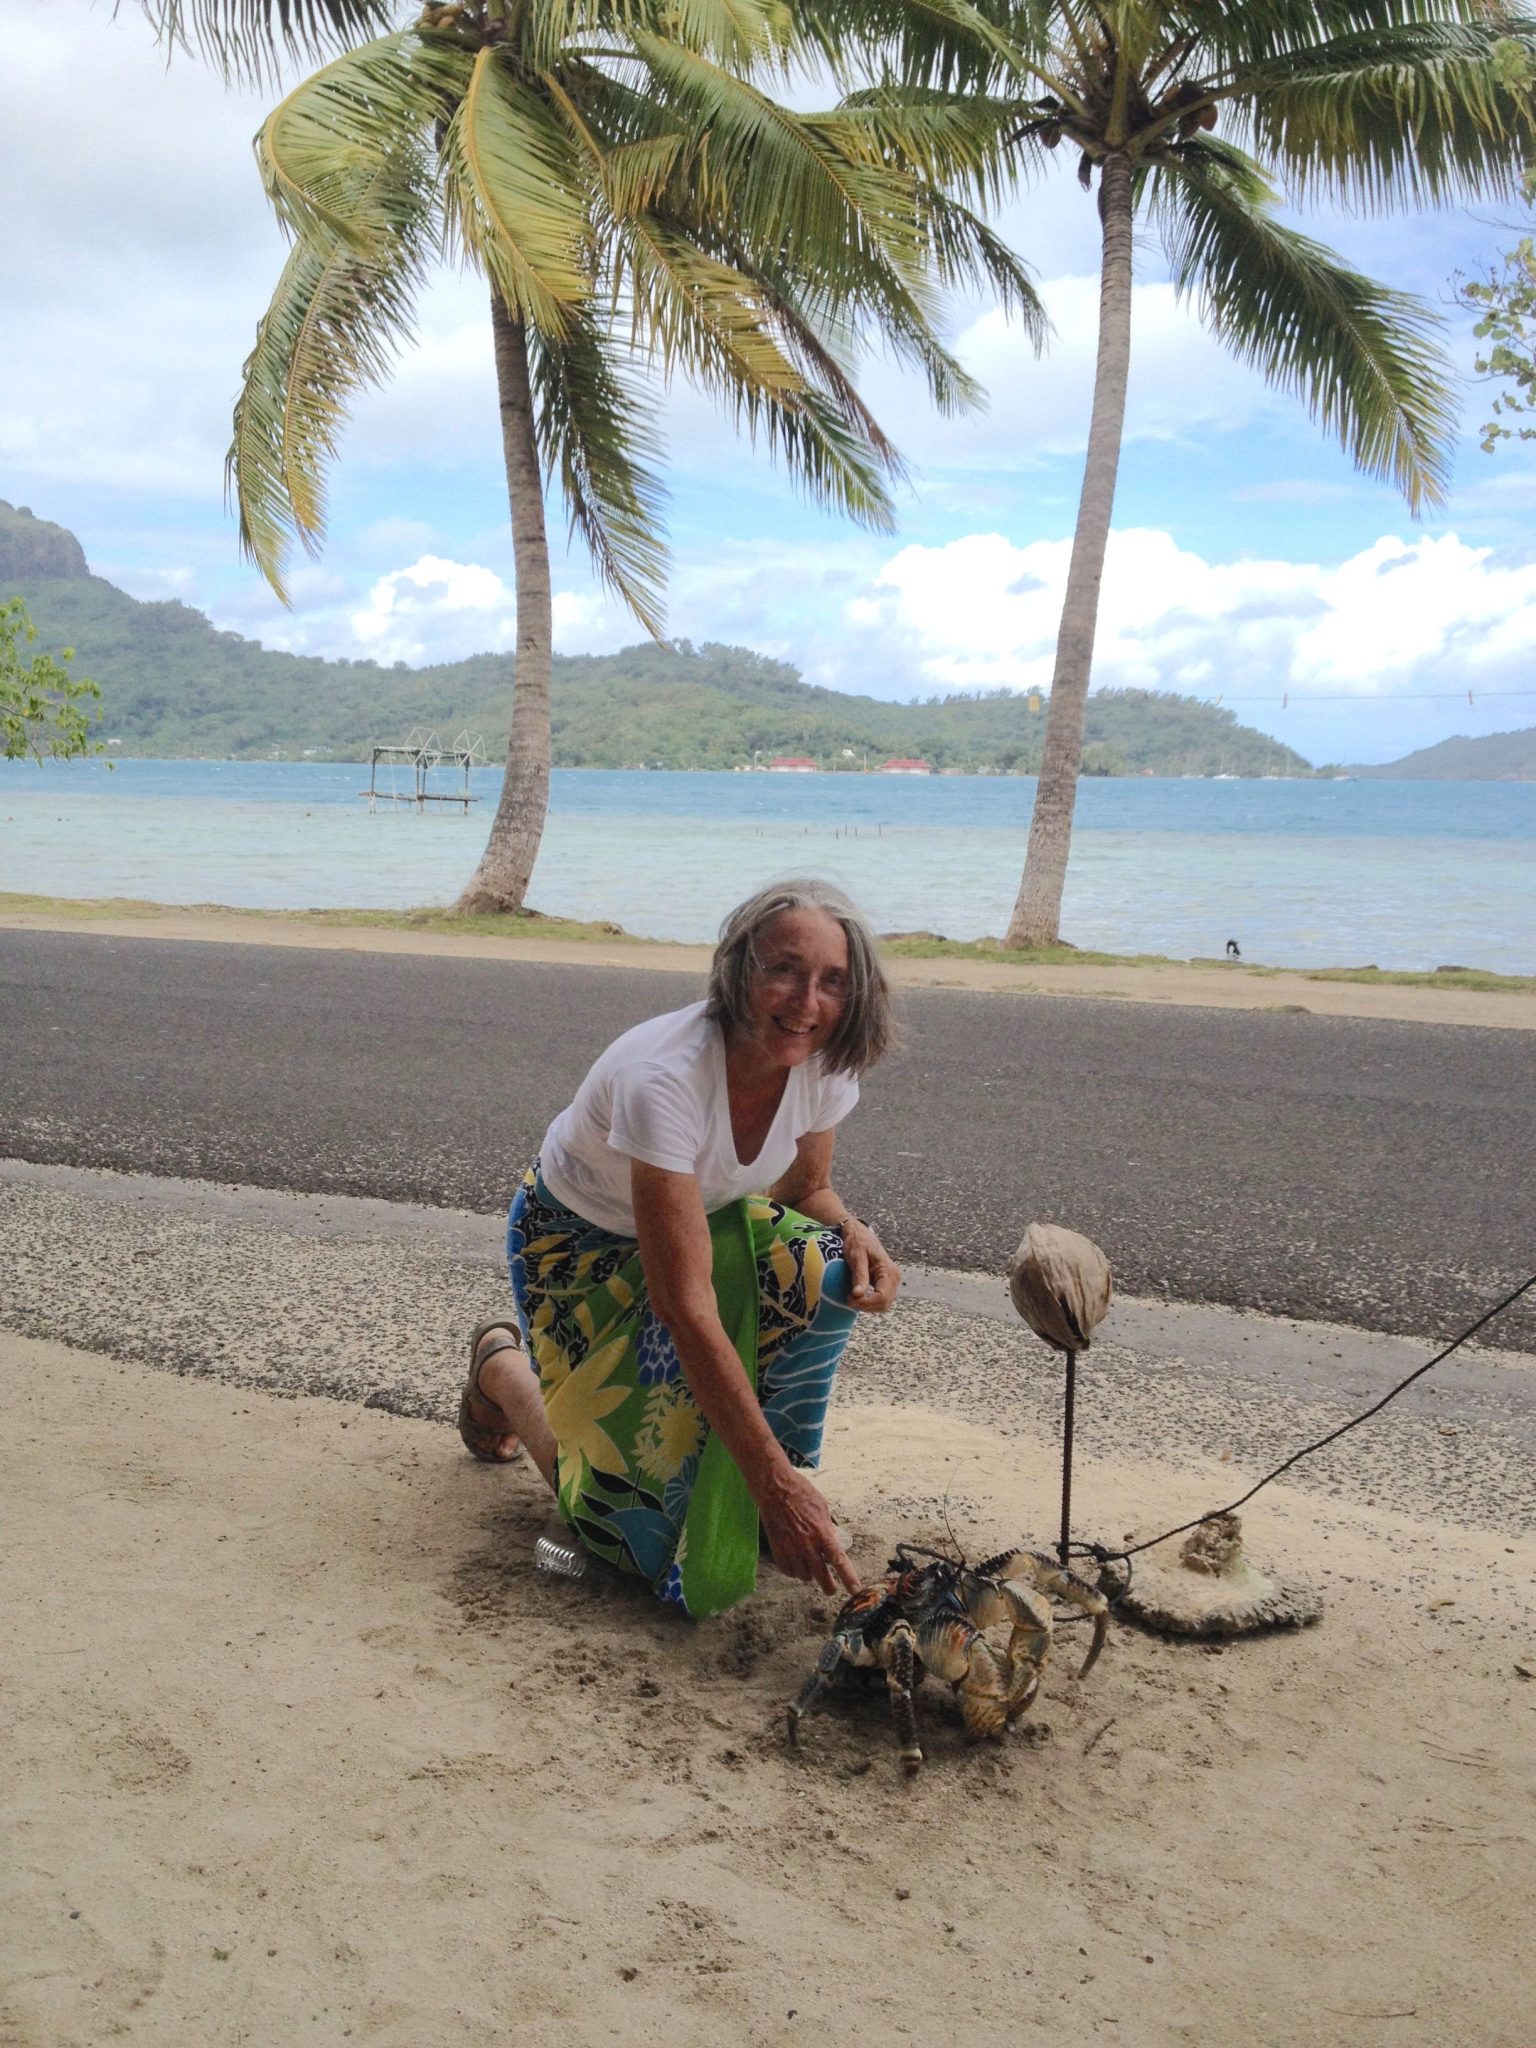 30. Anne is with C.T. the flambouyant 15 year old coconut crab.  C.T. is eating a coconut with his huge claws. Coconut crabs used to be everywhere in Bora Bora.  Now they bring them in from other islands in Polynesia to sell to the locals for food.